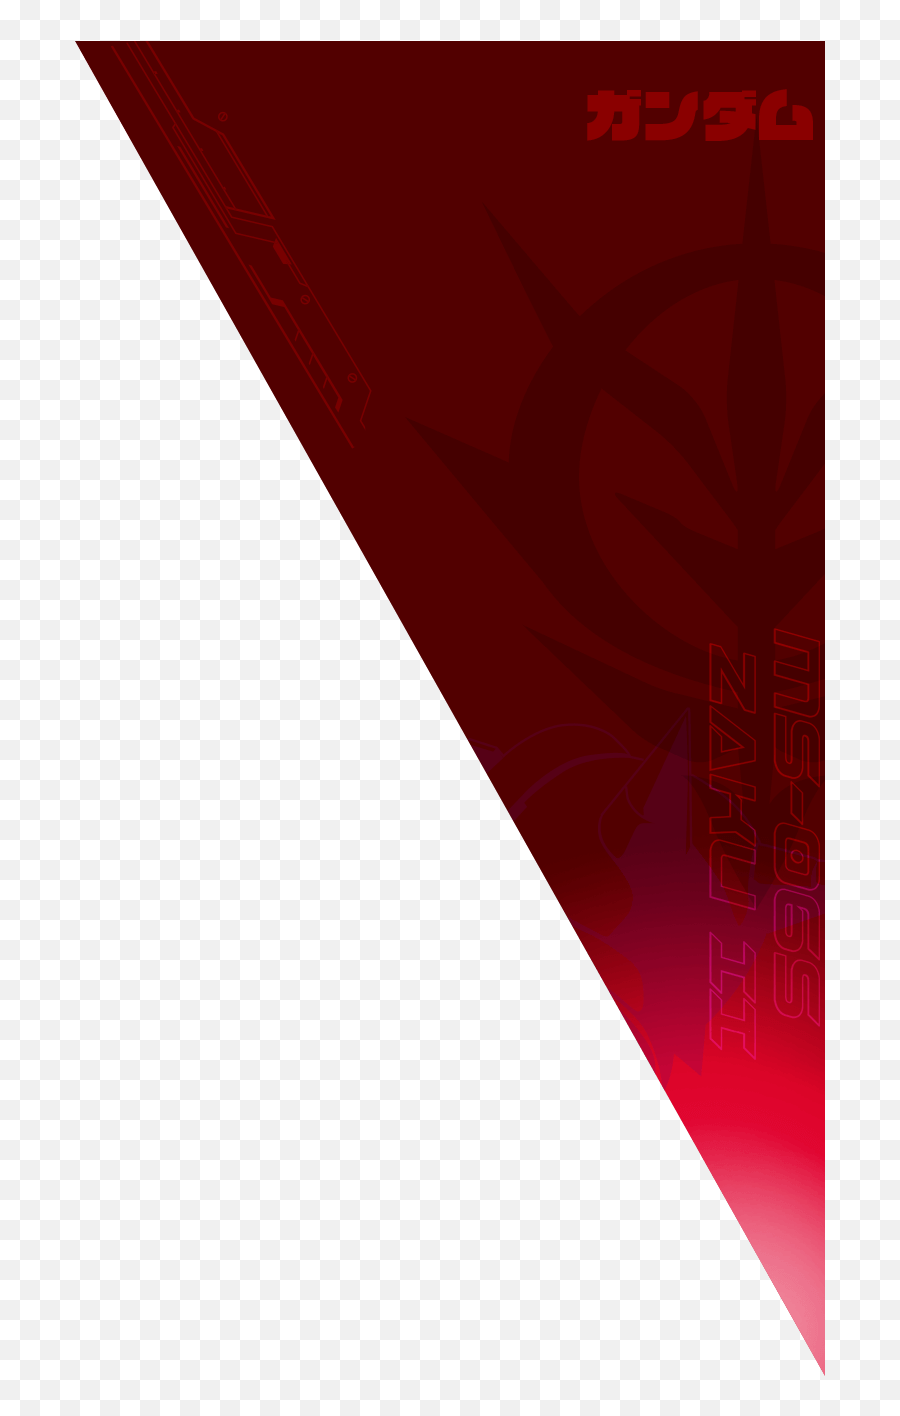 Asus X Gundam Png 2 Pieces Of Paper With Red Icon